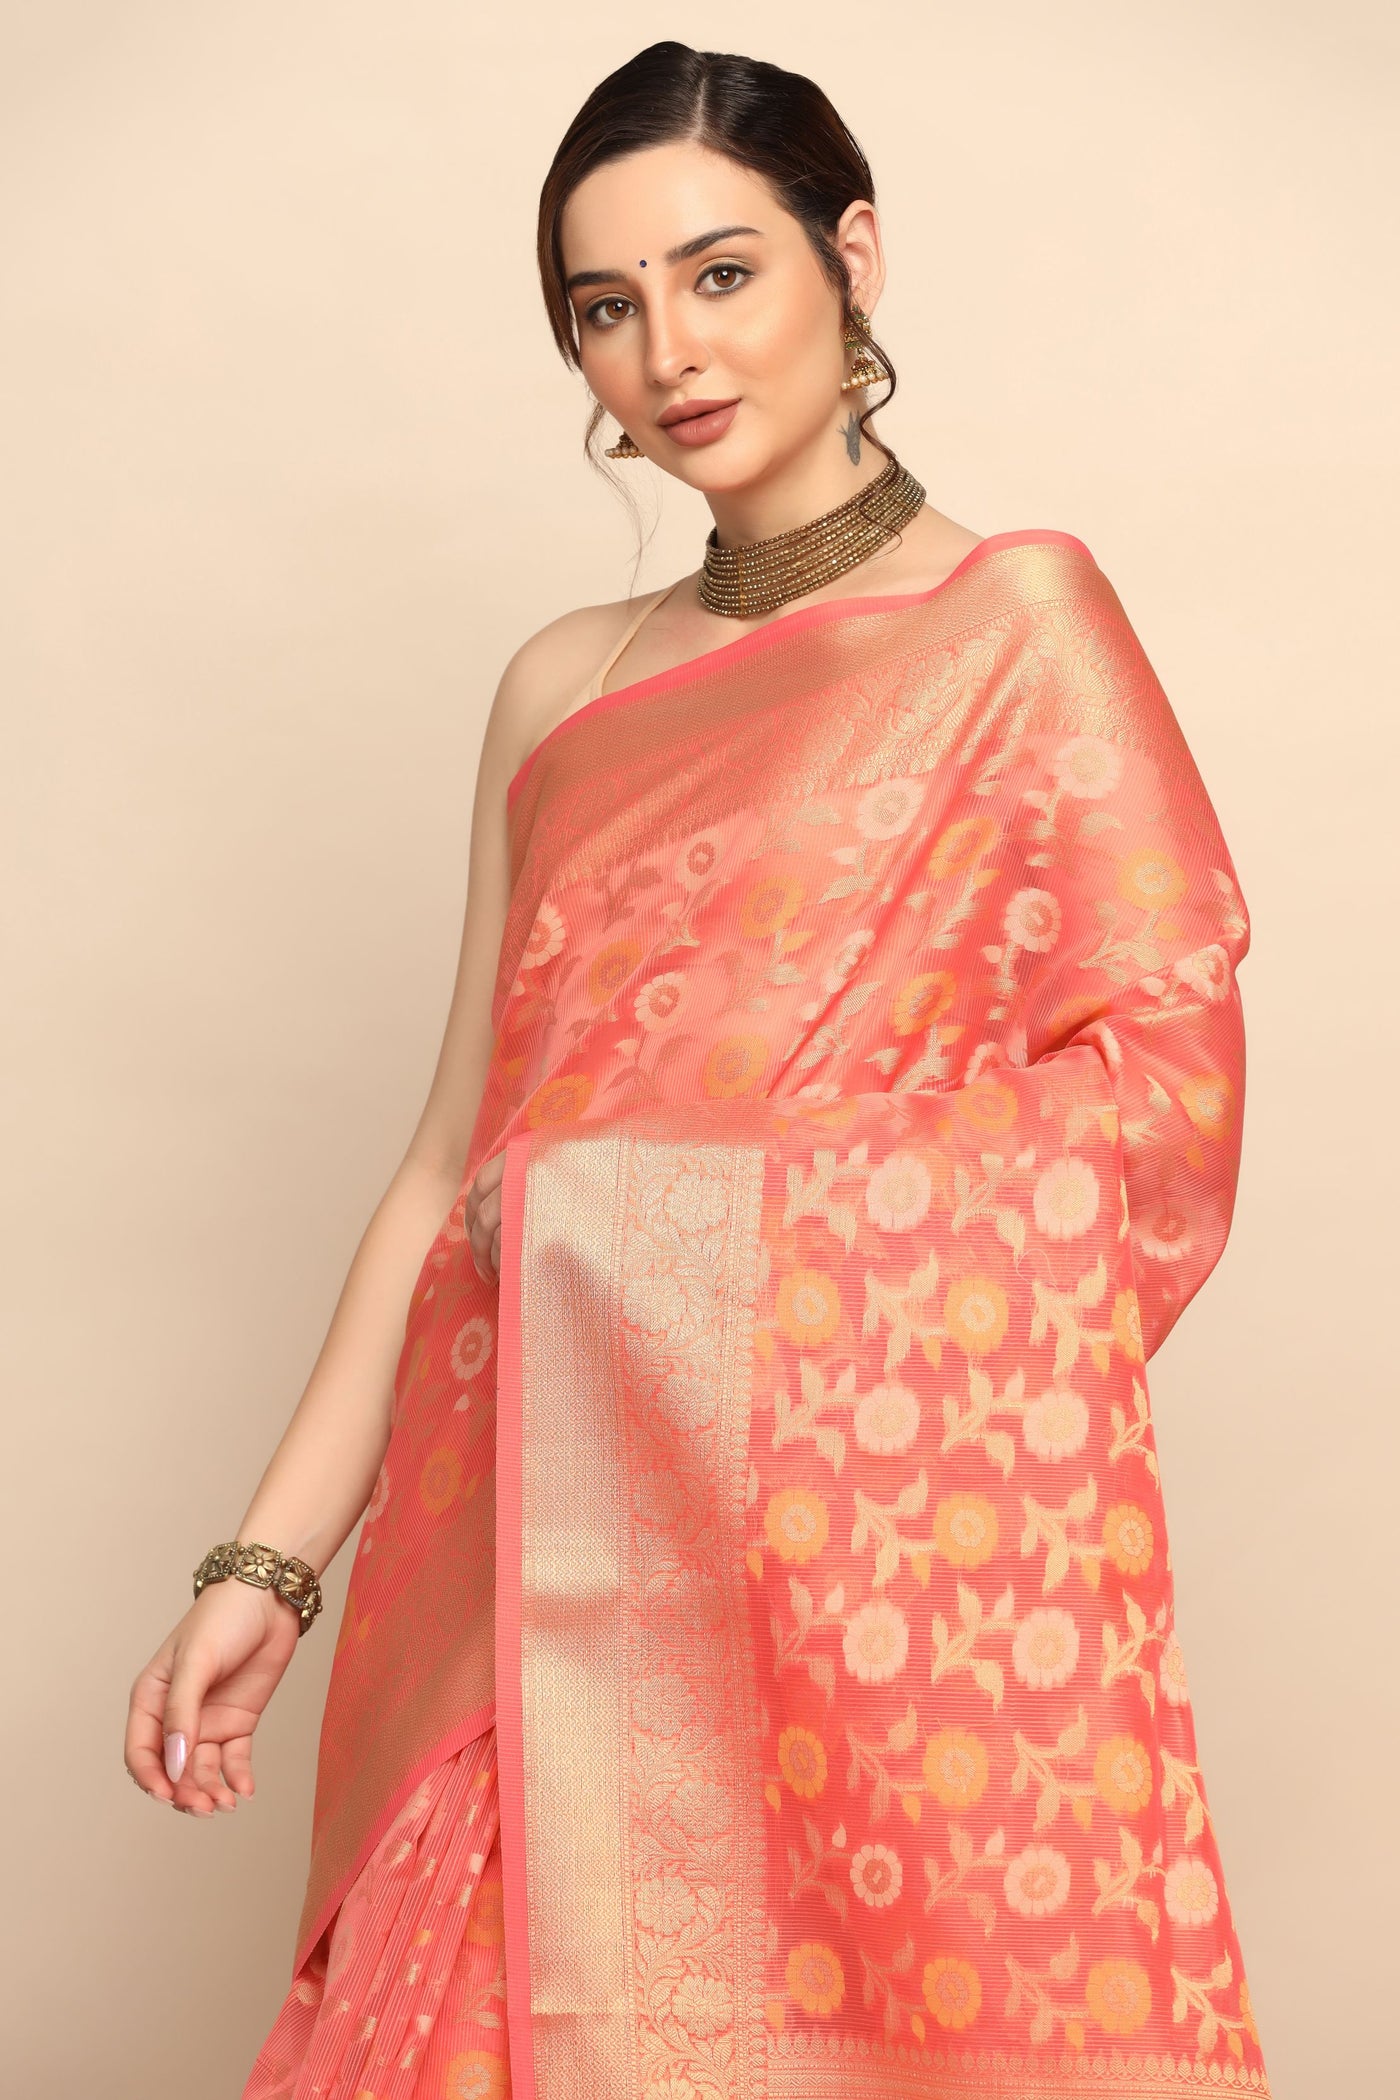 Whispering Petals: Peach Saree with Floral Motif in Cotton Silk